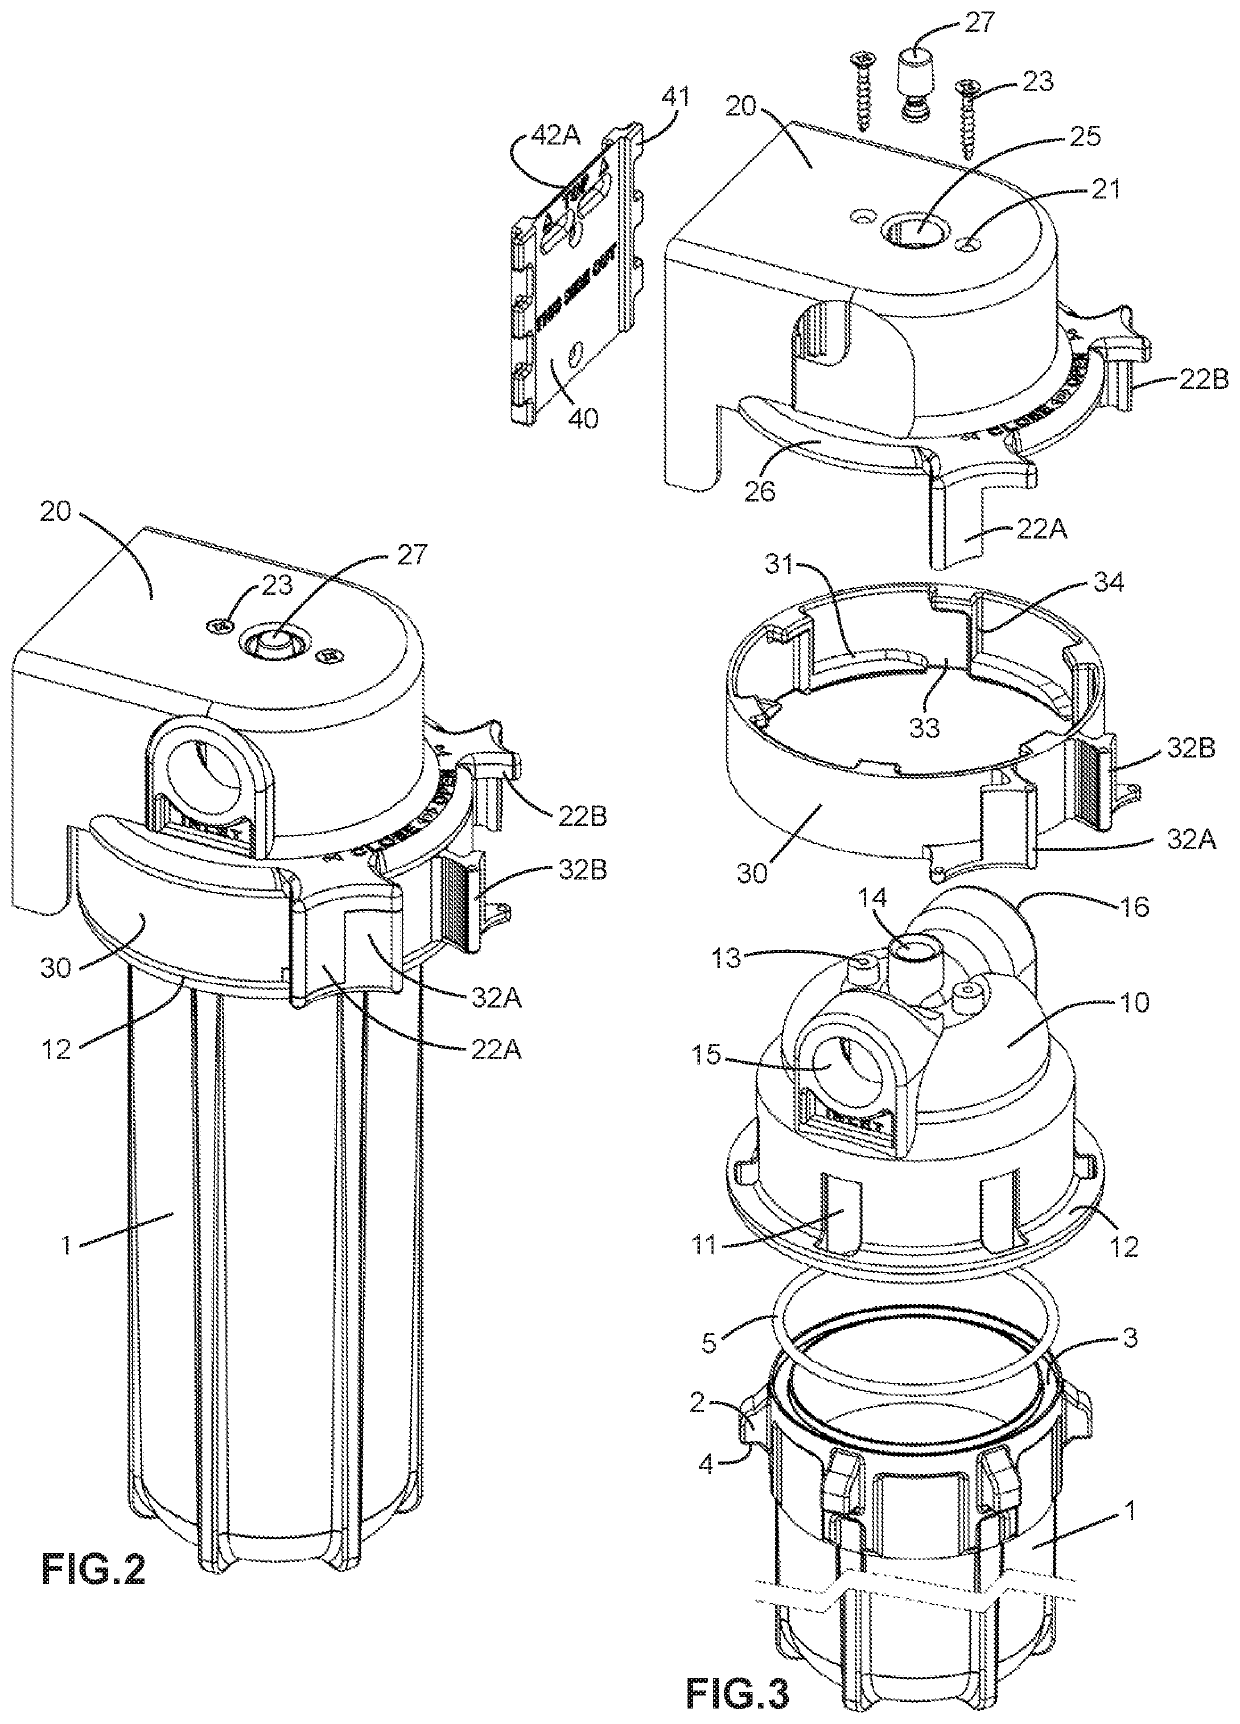 Manually detachable enclosure for replaceable filter elements and the like